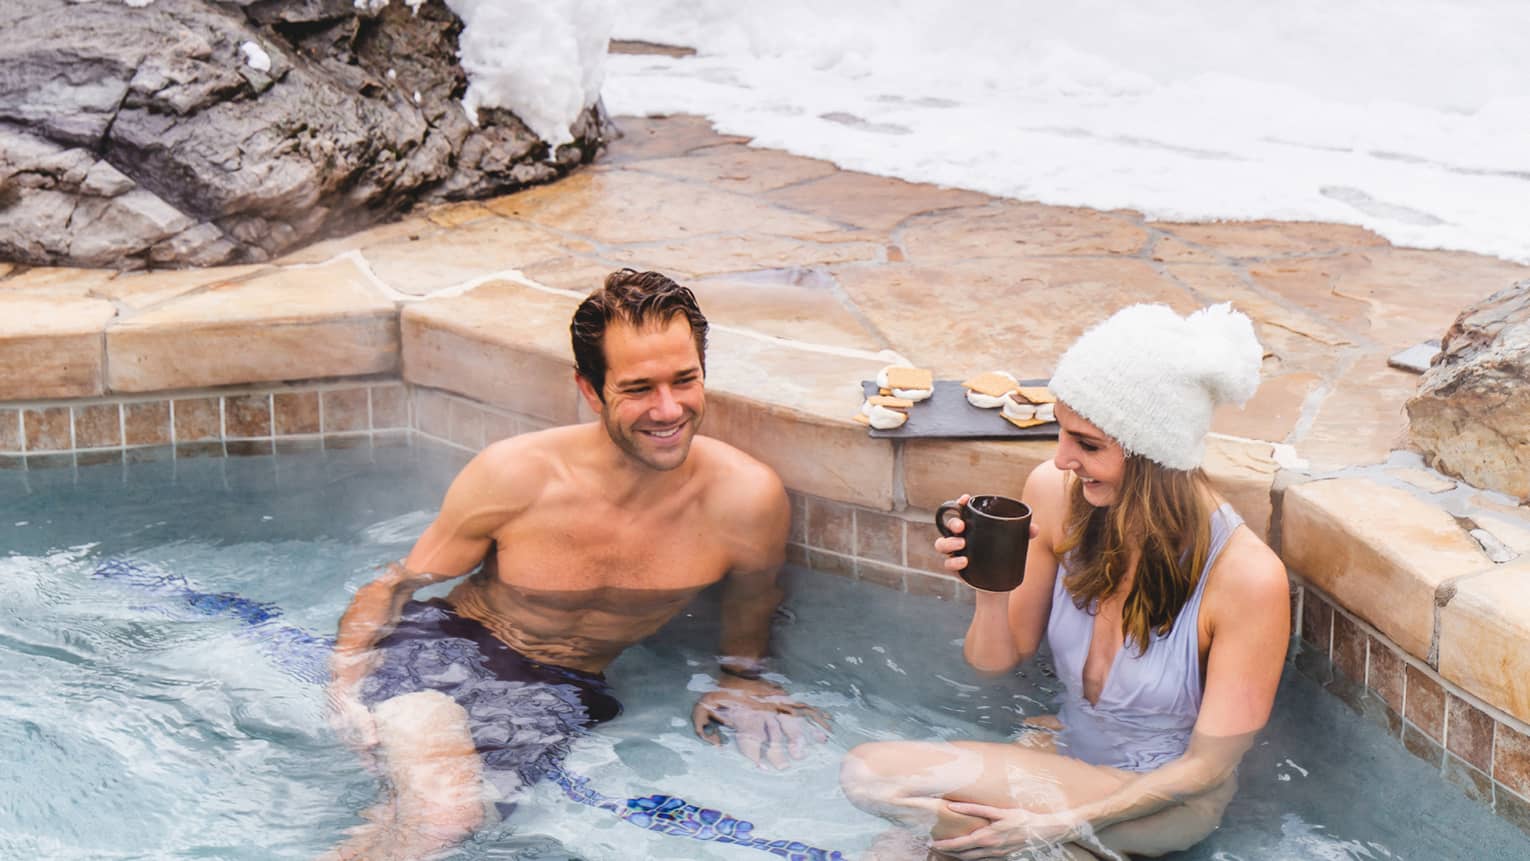 A man and woman in lounging in a heated pool surrounded by snow.